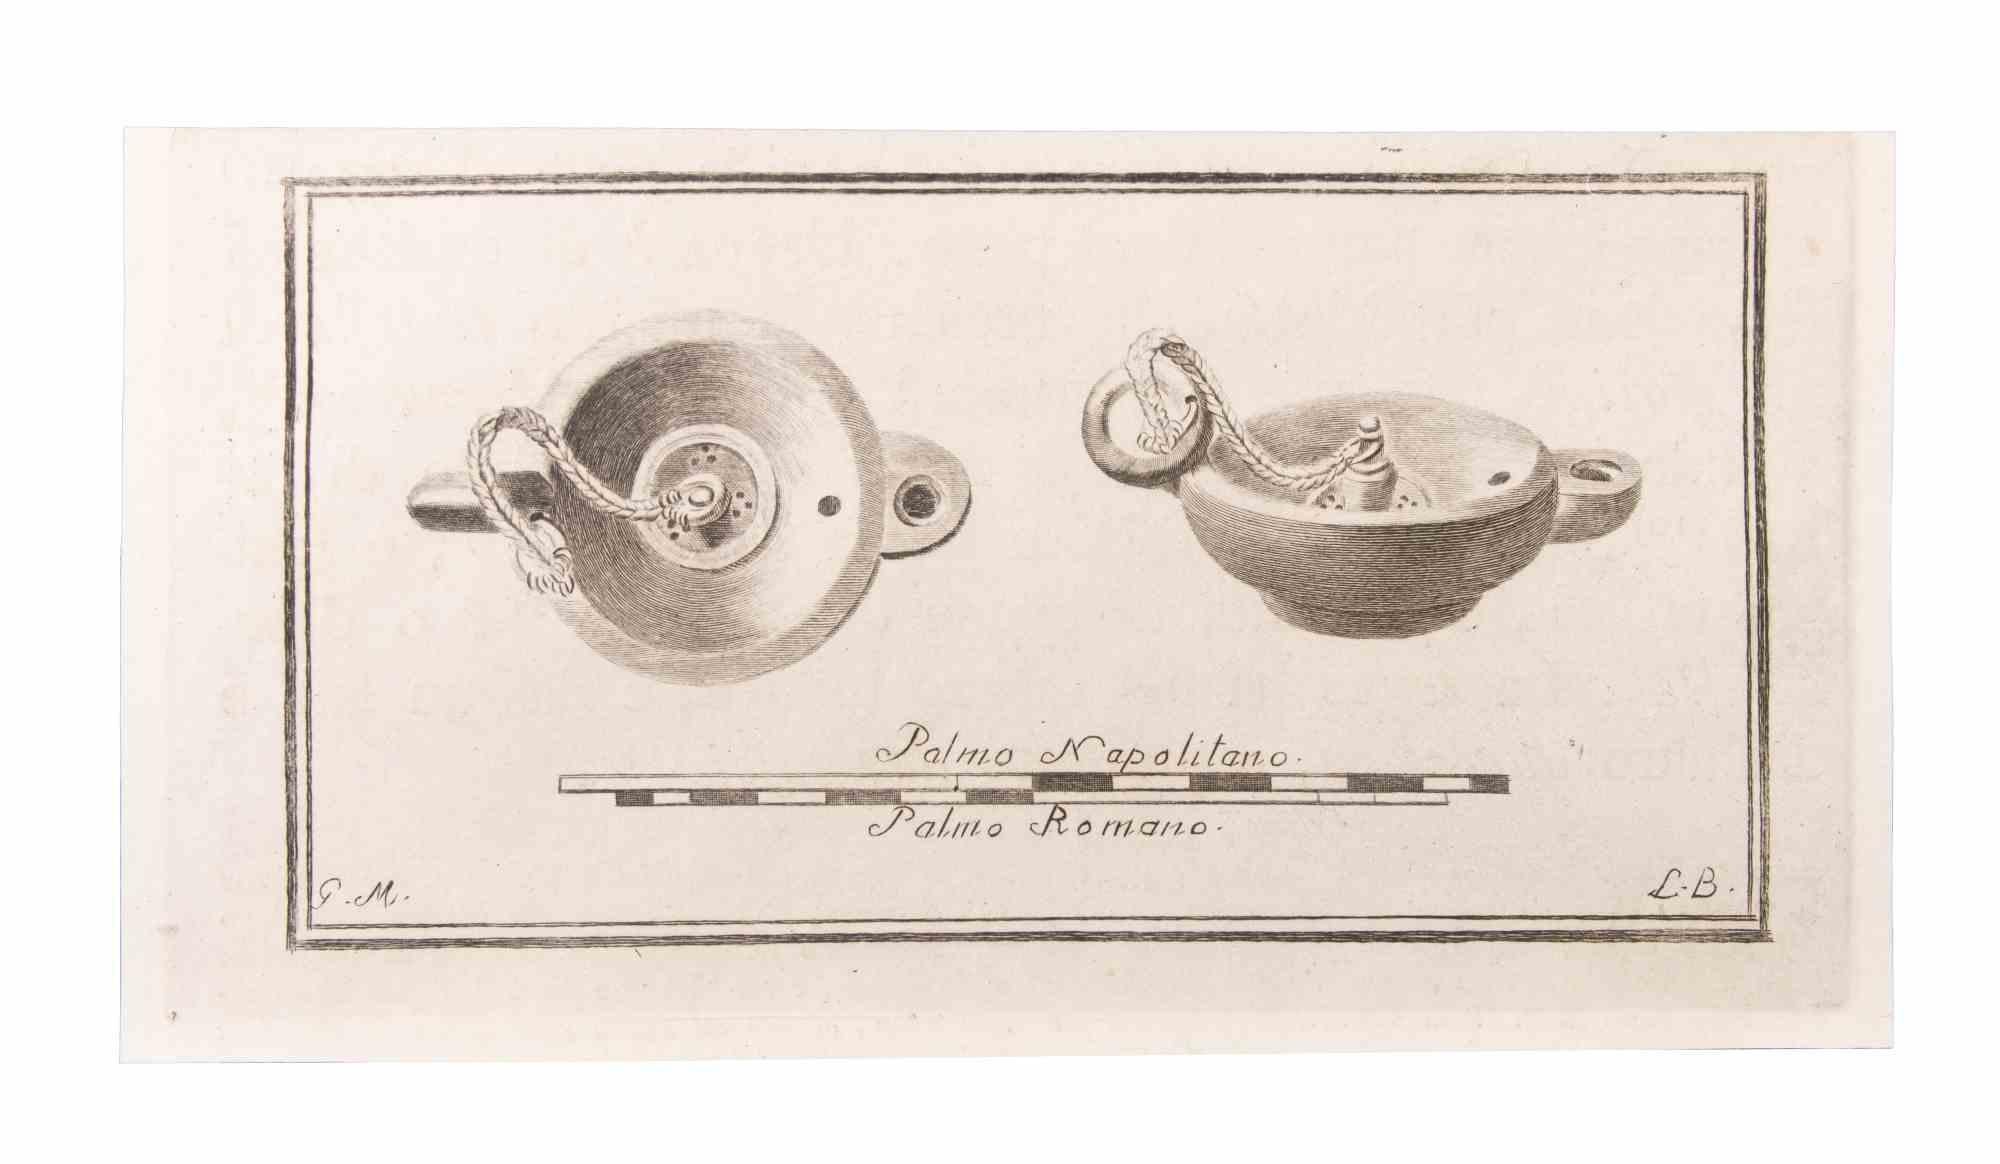 Oil Lamp is an Etching realized by  Luigi Biondi (1776-1839).

The etching belongs to the print suite “Antiquities of Herculaneum Exposed” (original title: “Le Antichità di Ercolano Esposte”), an eight-volume volume of engravings of the finds from